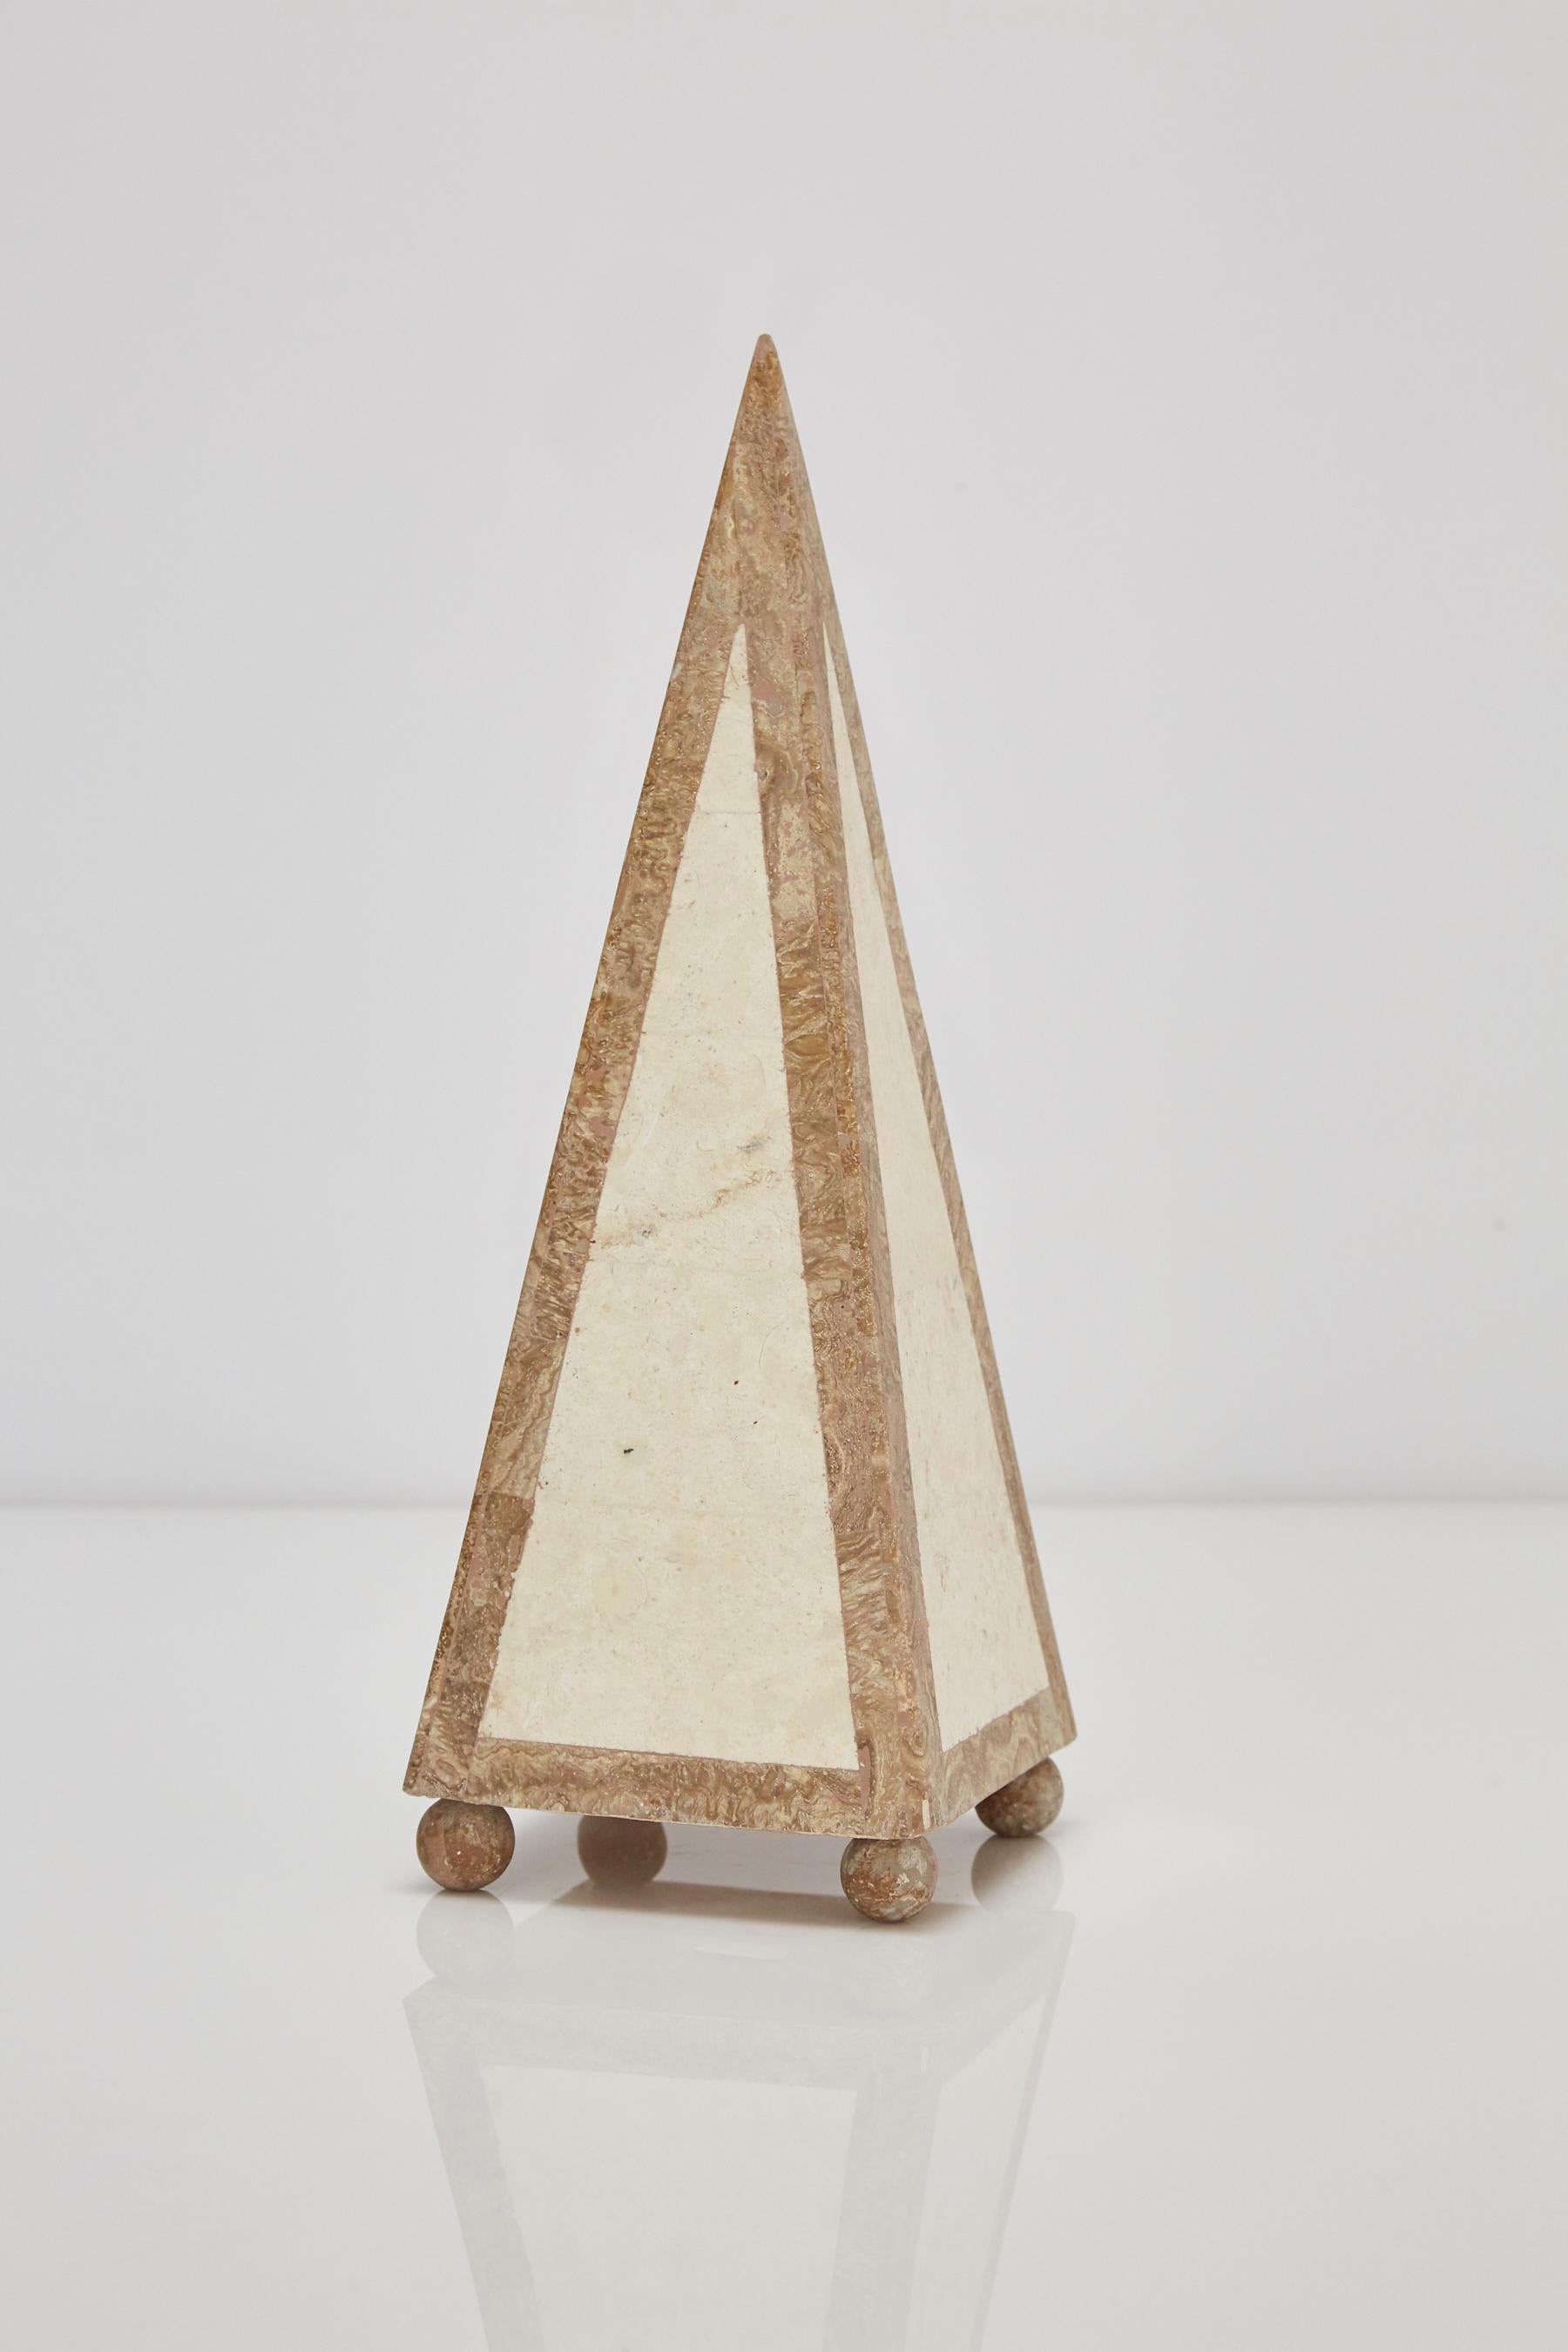 Philippine 15 in. Tall Decorative Tessellated Stone Pyramid, 1990s For Sale